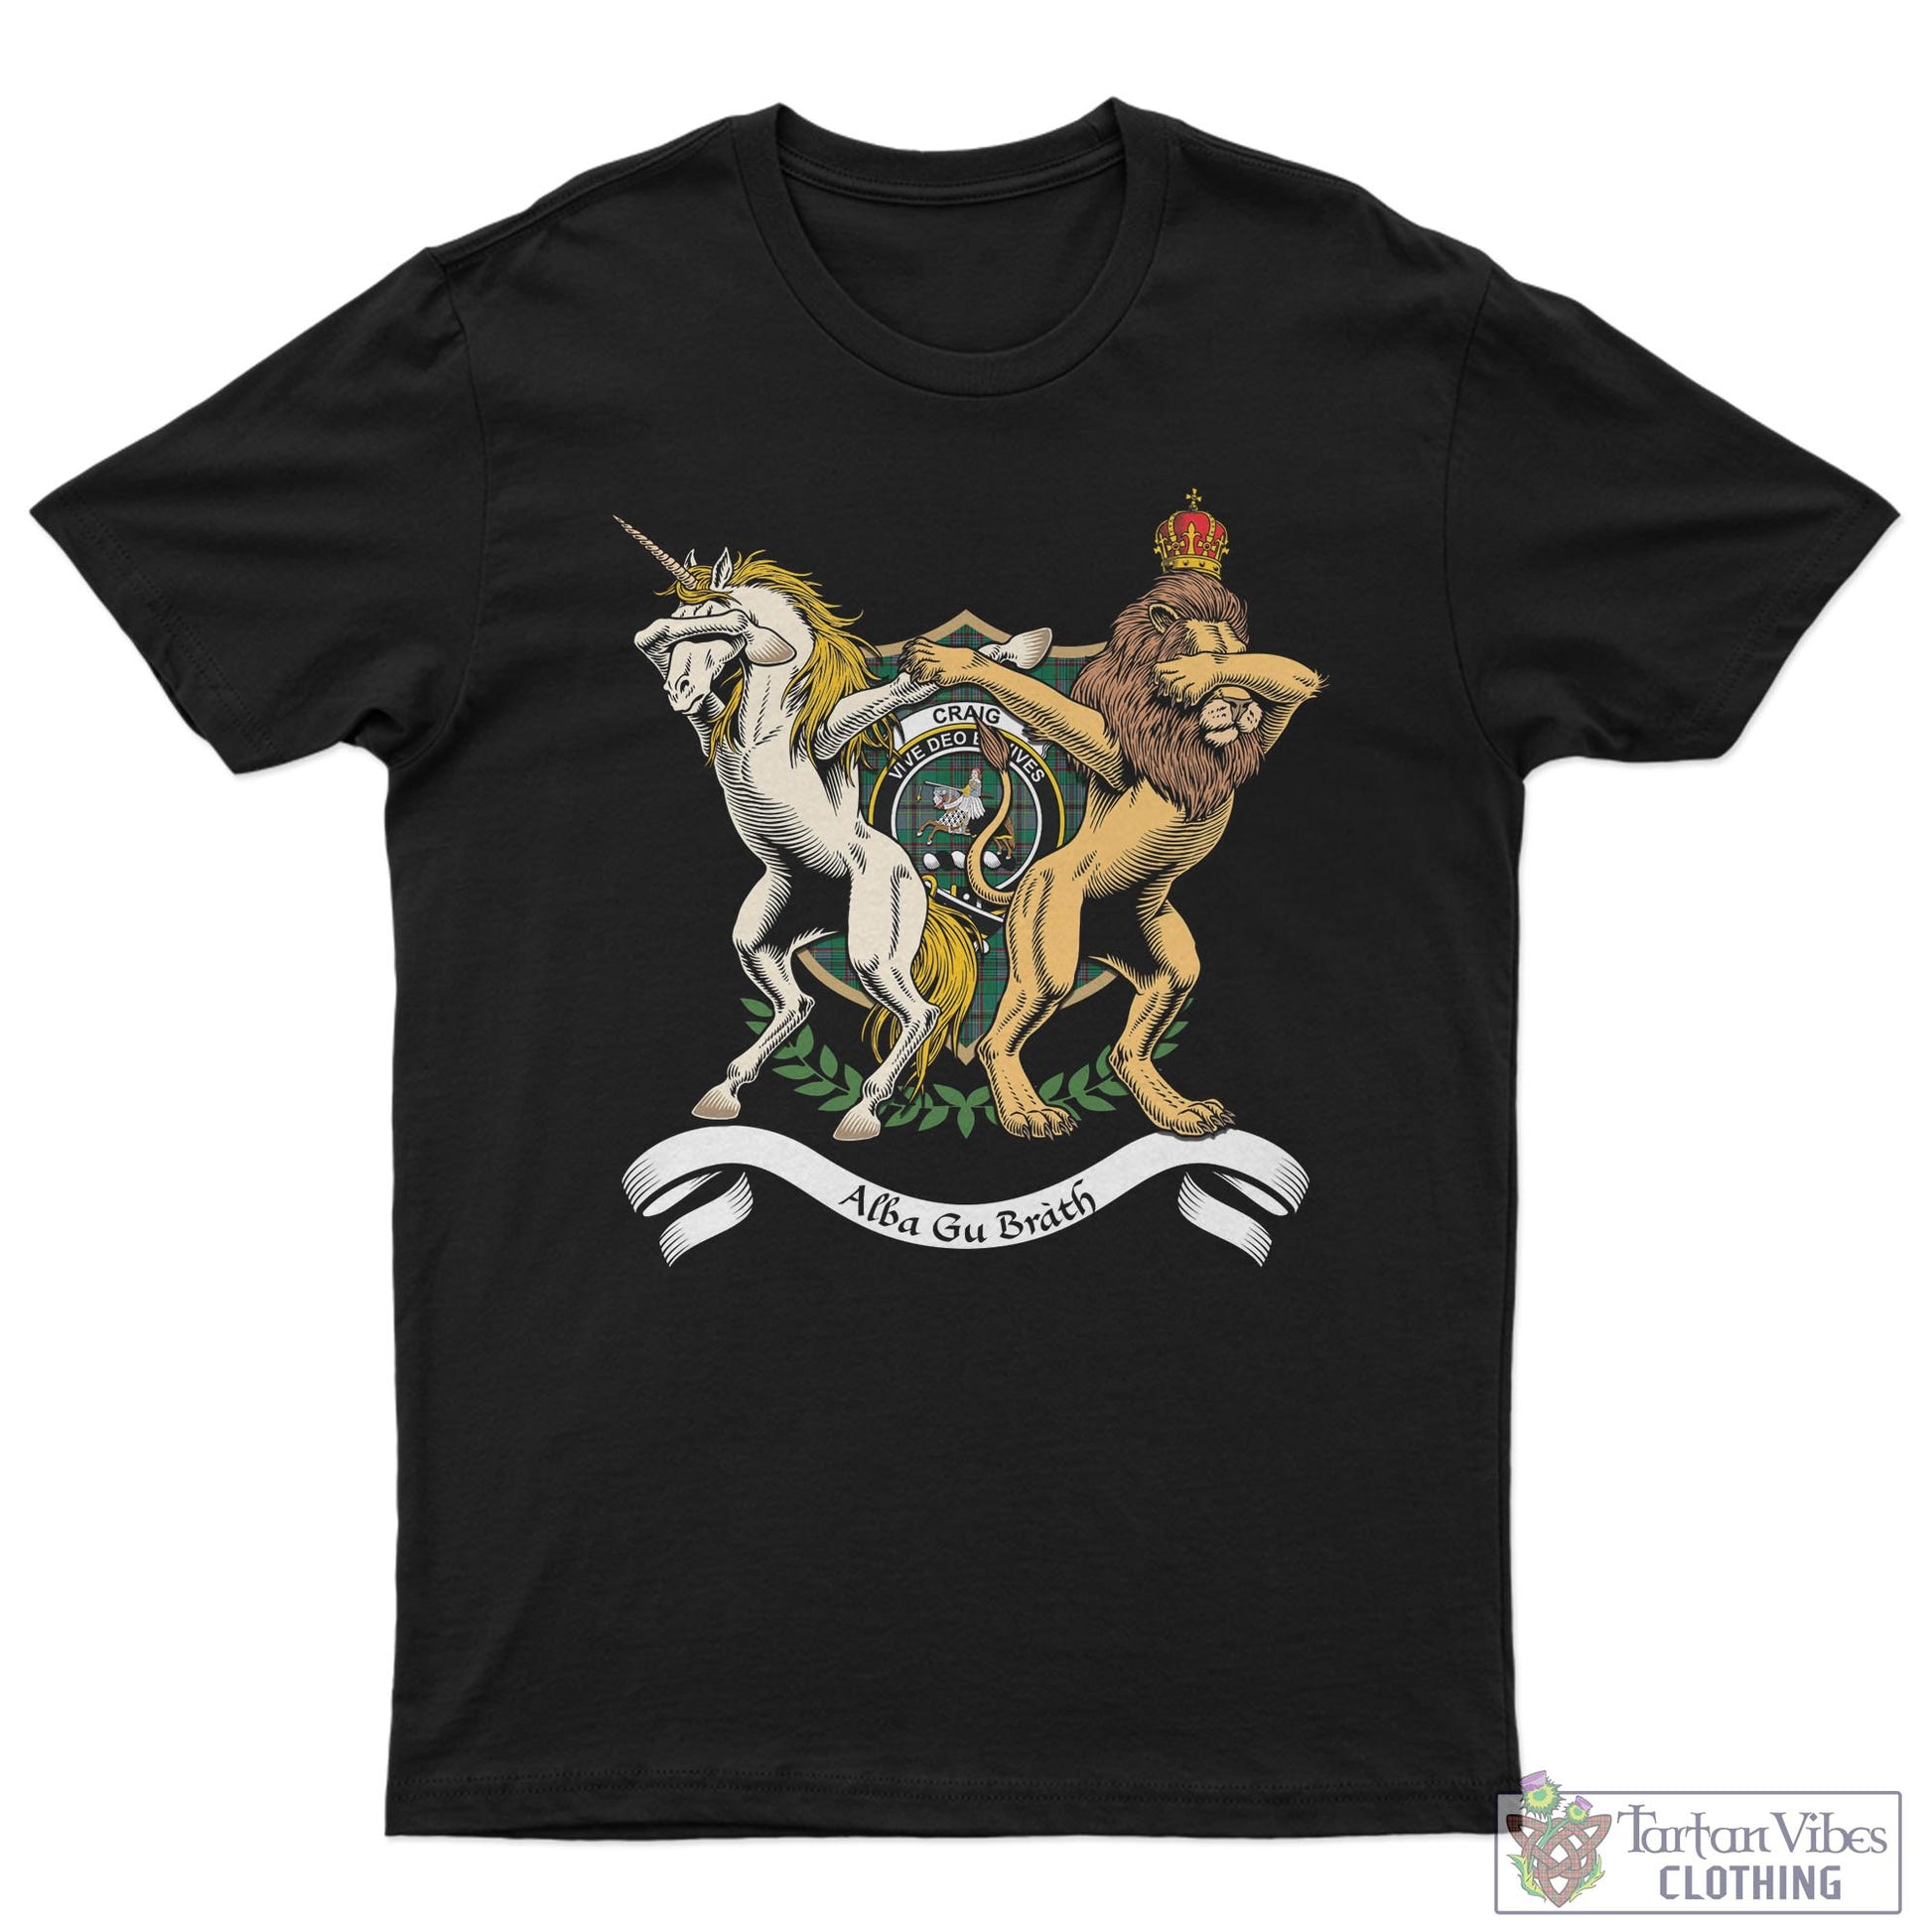 Tartan Vibes Clothing Craig Family Crest Cotton Men's T-Shirt with Scotland Royal Coat Of Arm Funny Style